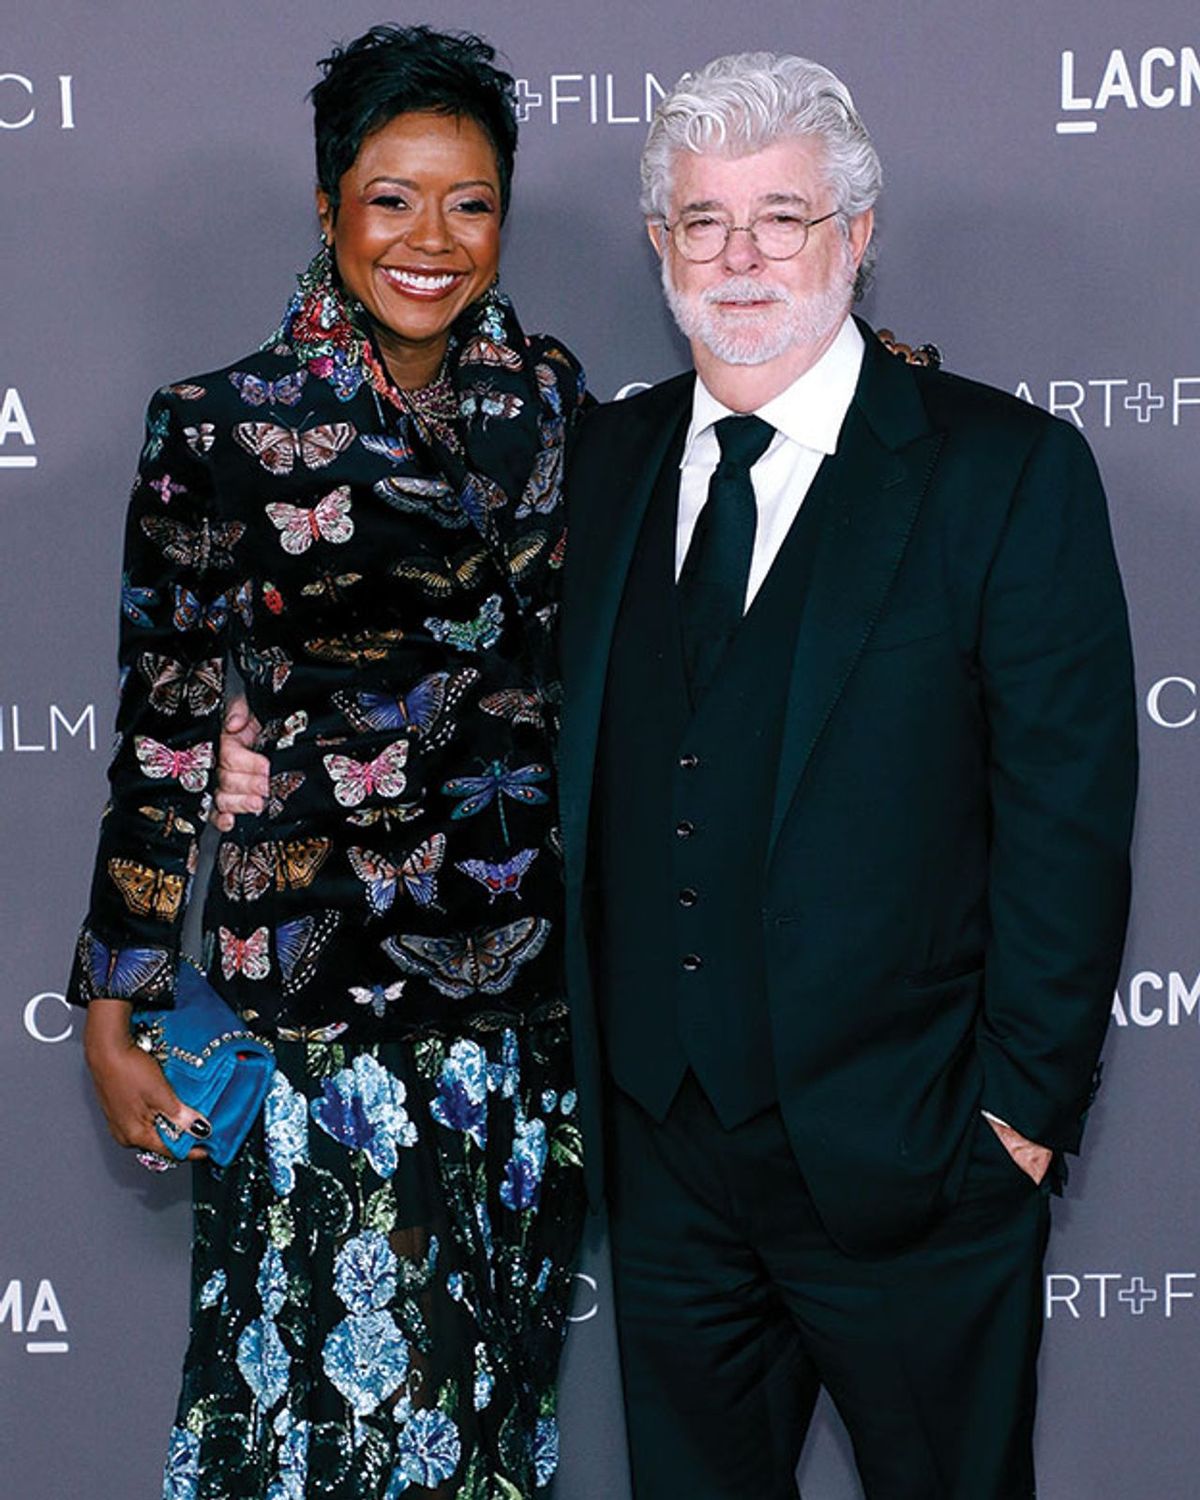 George Lucas and his wife Mellody Hobson, the founders of the new museum under construction in Exposition Park, south Los Angeles Photo: Taylor Hill/Getty Images